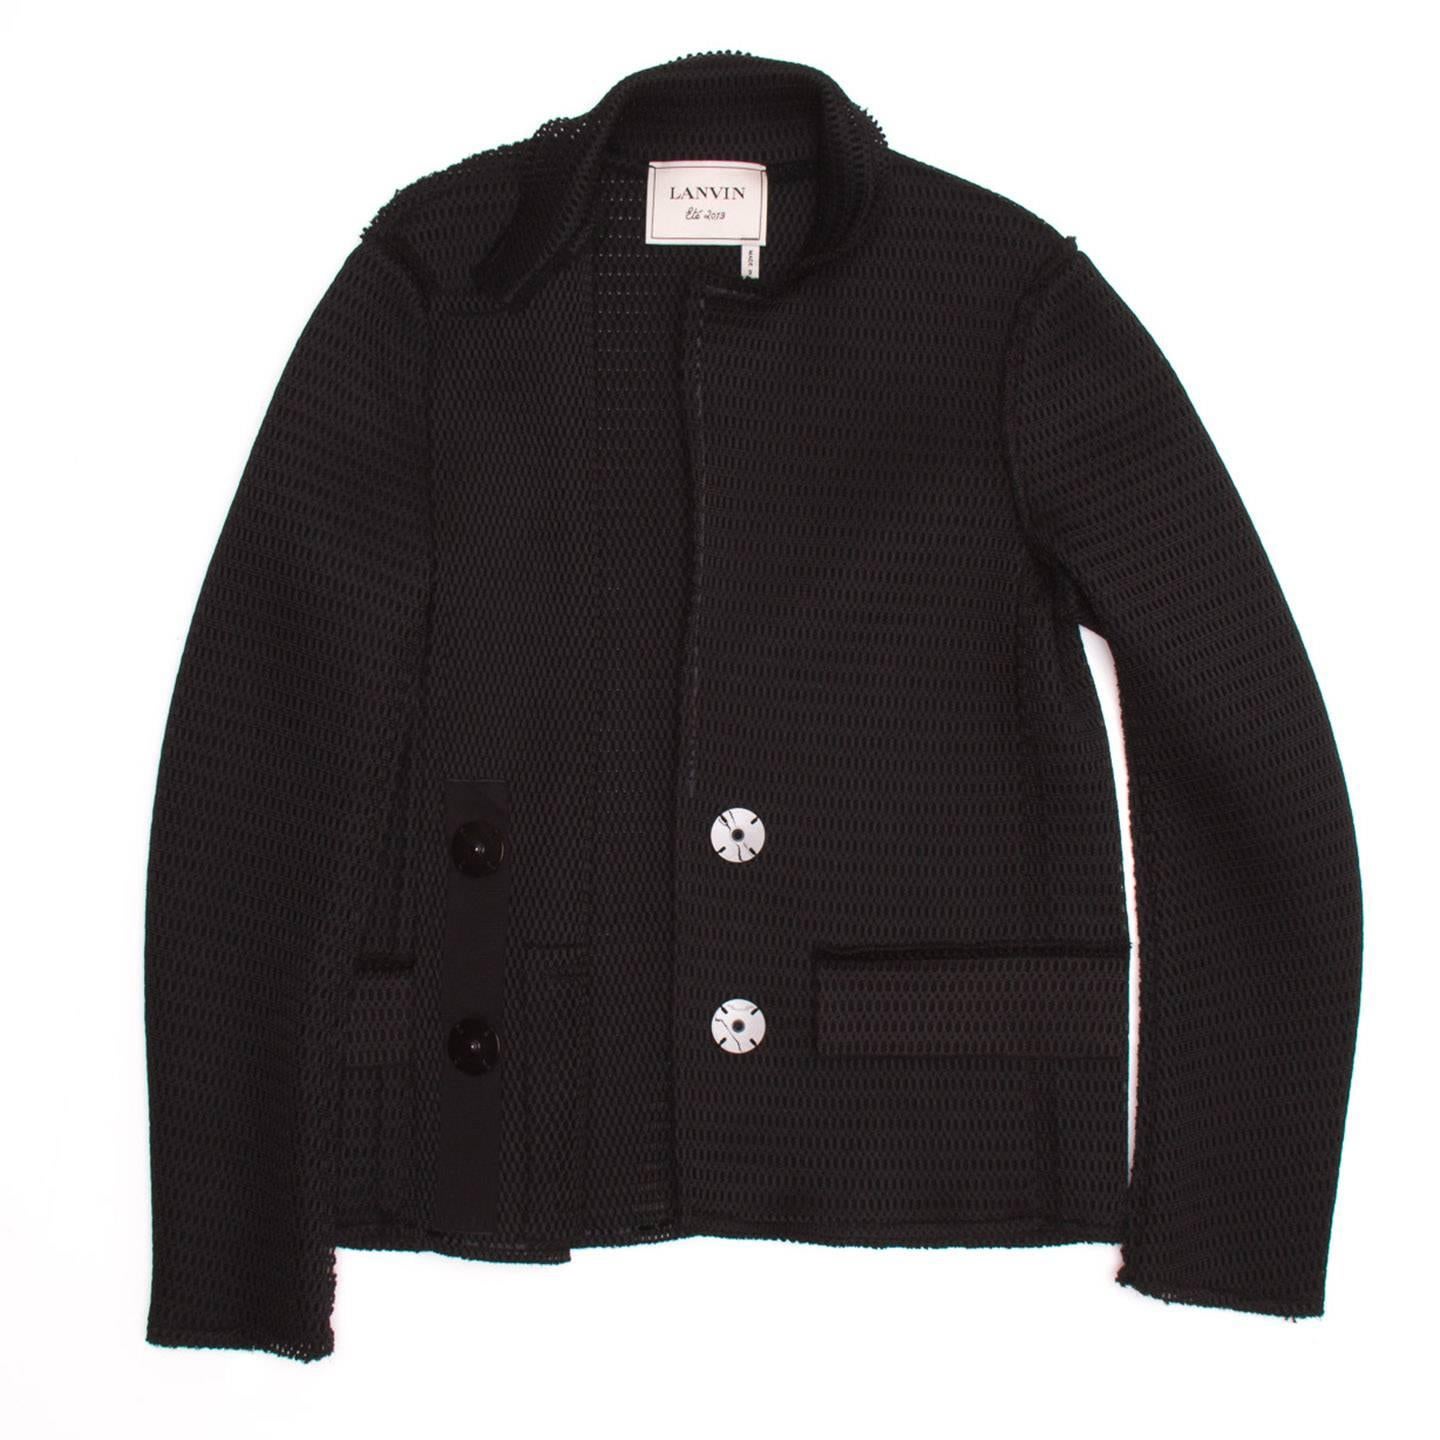 Lanvin Black Perforated Blazer In New Condition For Sale In Brooklyn, NY